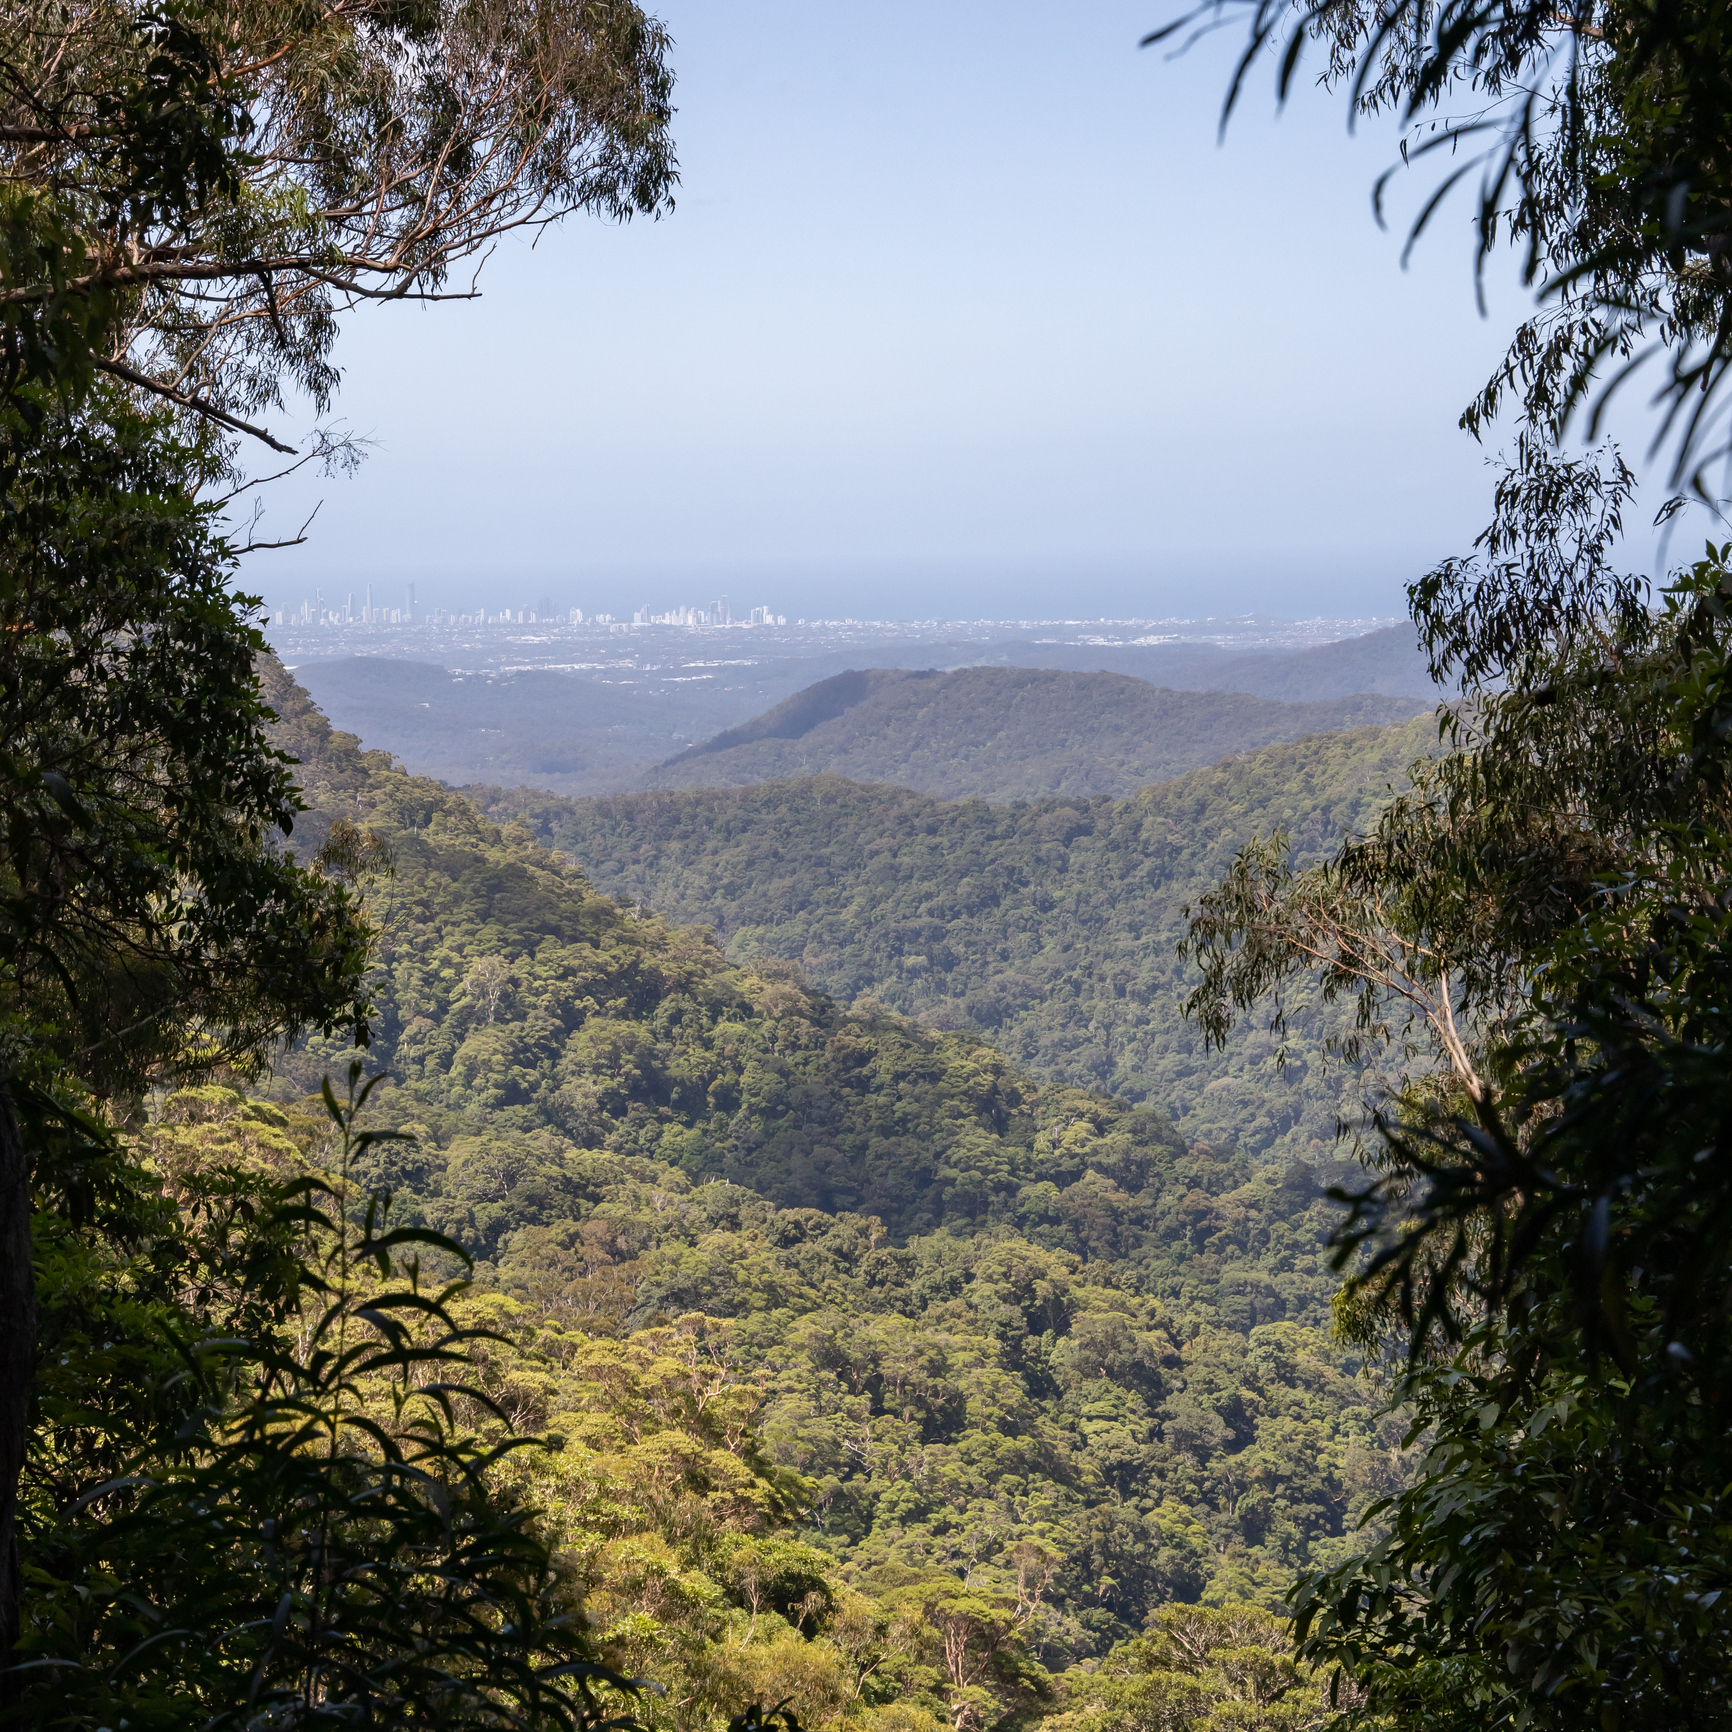 View of the Gold Coast skyline from high up in Springbrook National Park